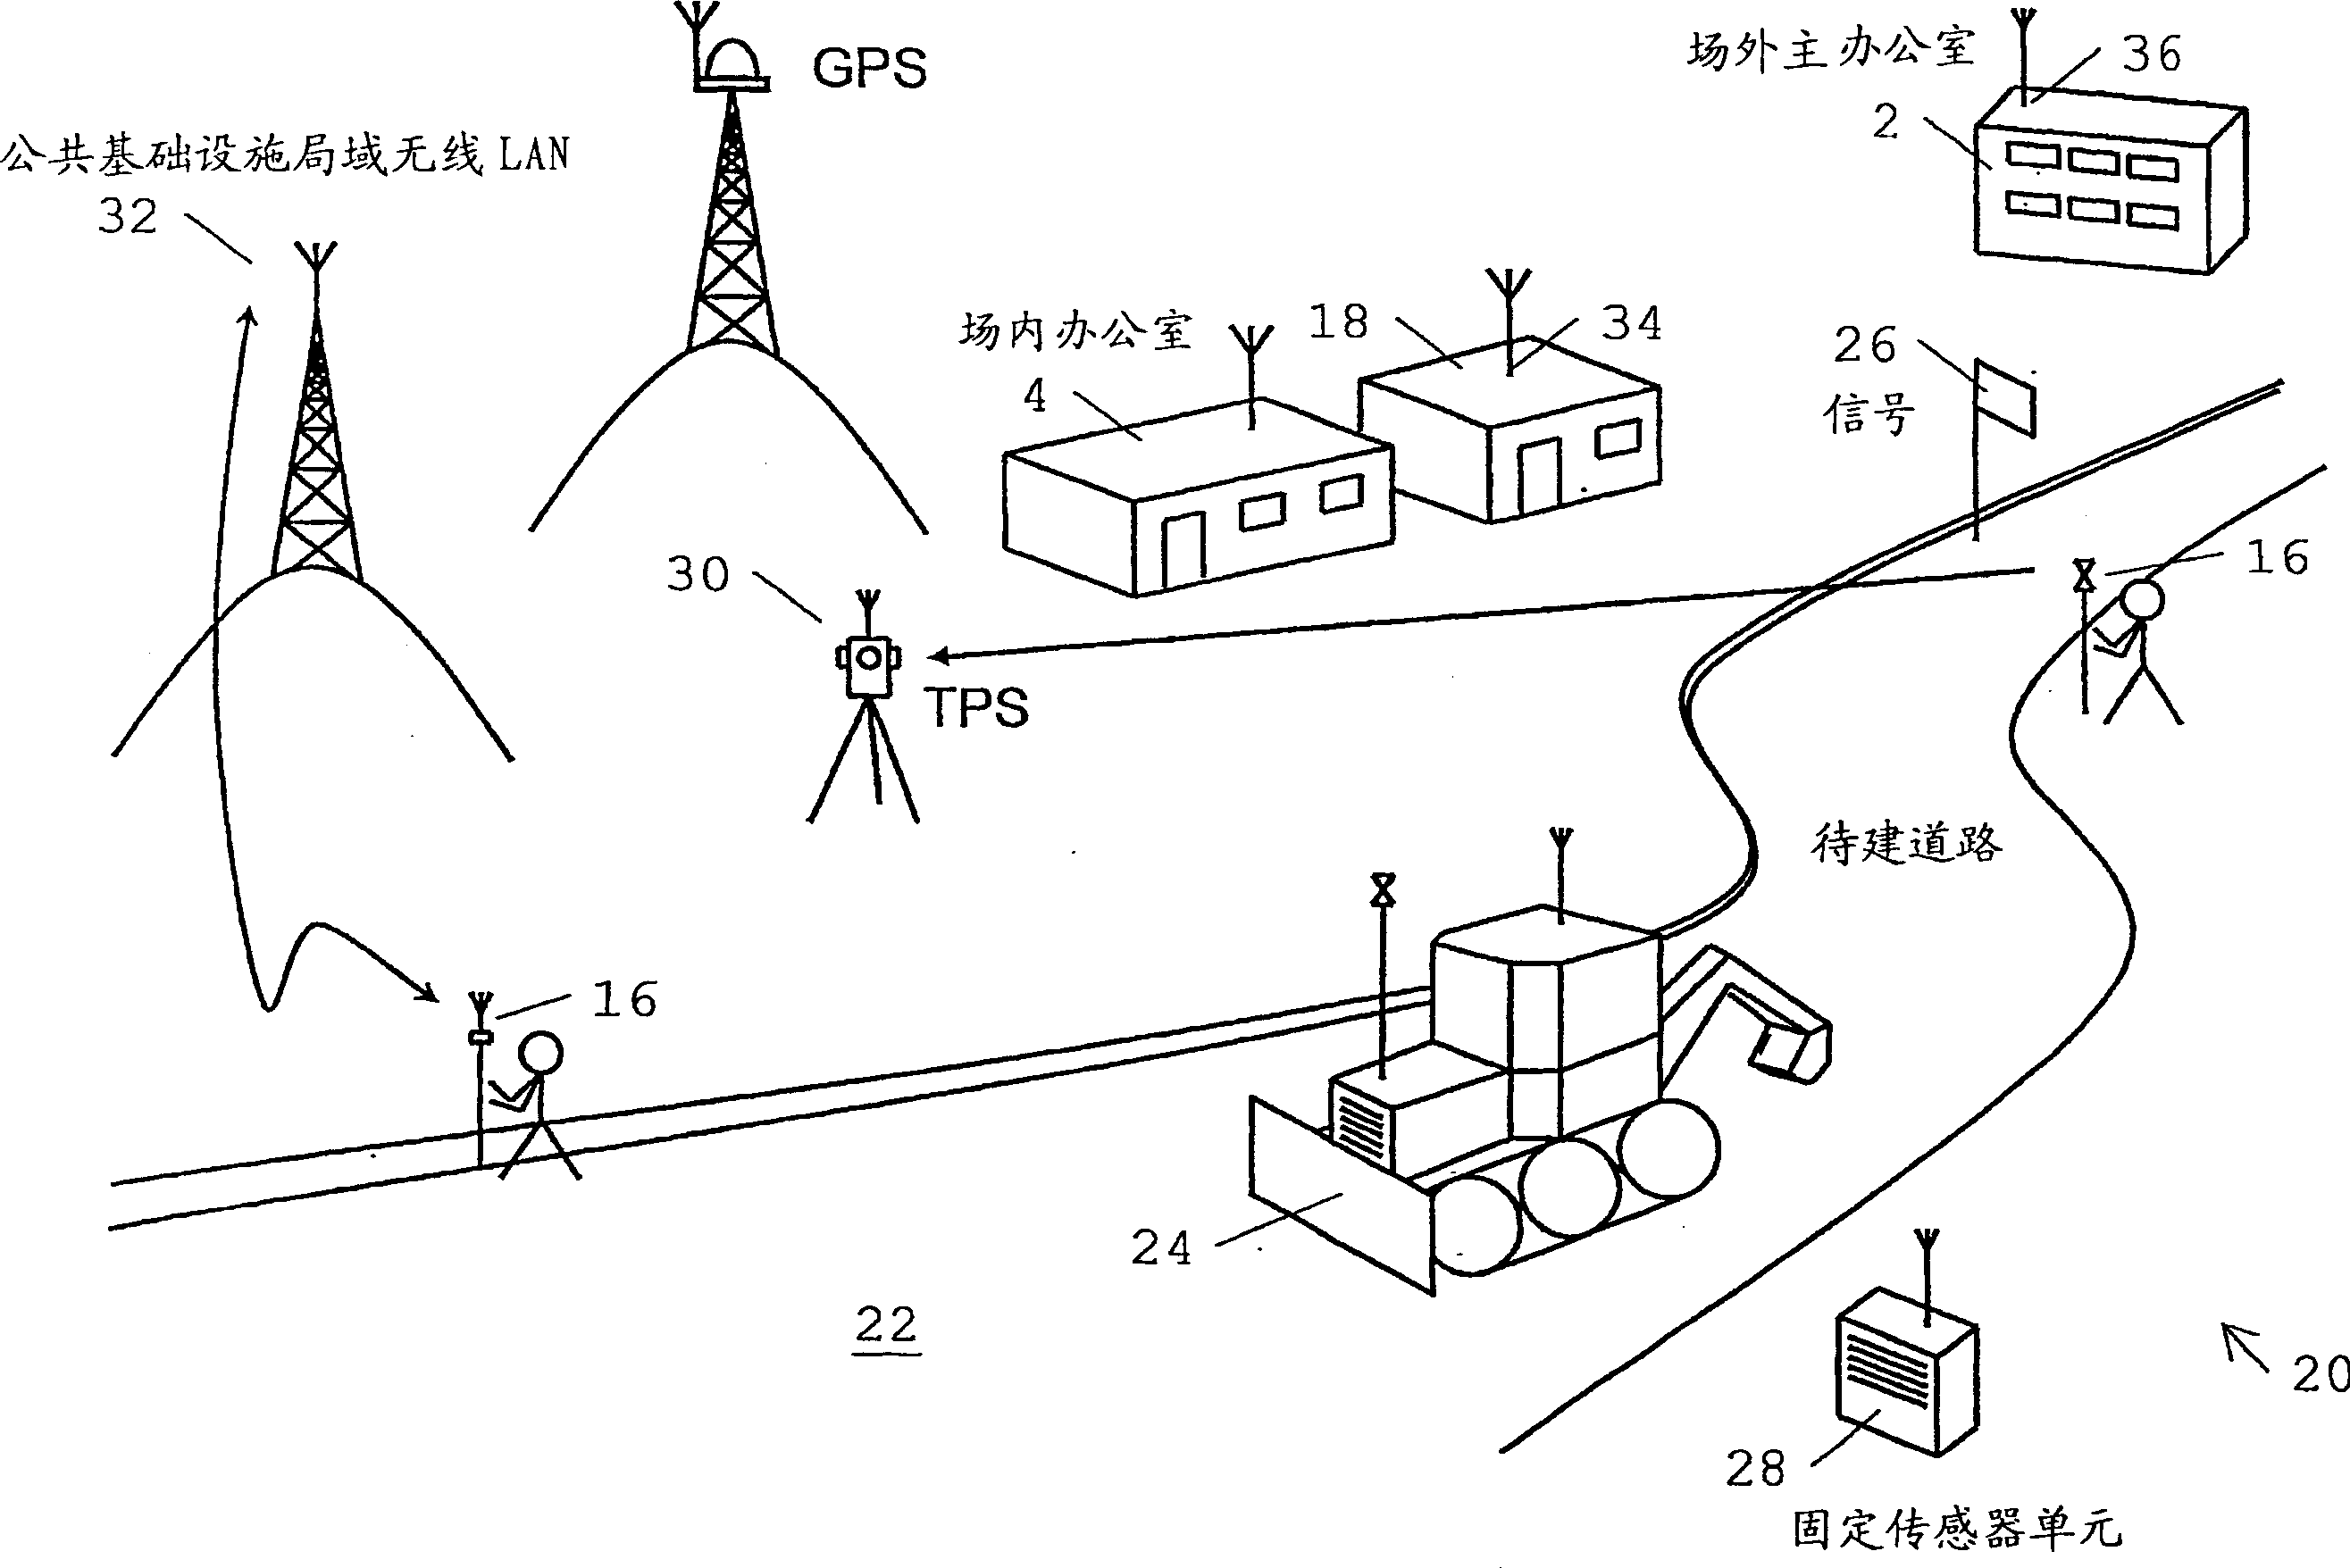 Method and apparatus for managing information exchanges between apparatus on a worksite